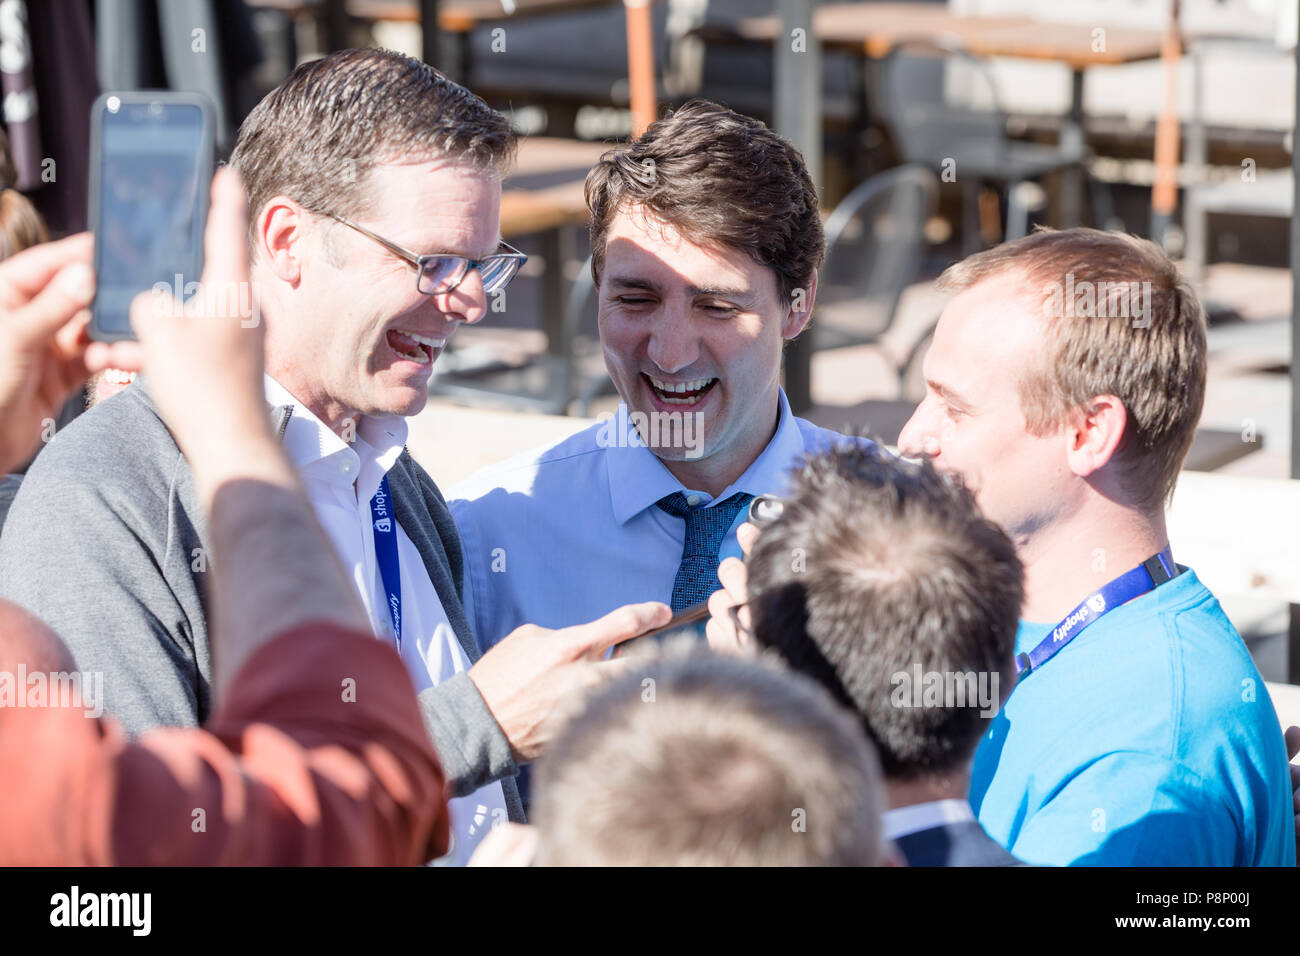 MAY 24, 2018 - TORONTO, CANADA - CANADIAN PRIME MINISTER JUSTIN TRUDEAU MEETS FANS AFTER A PUBLIC EVENT. Stock Photo